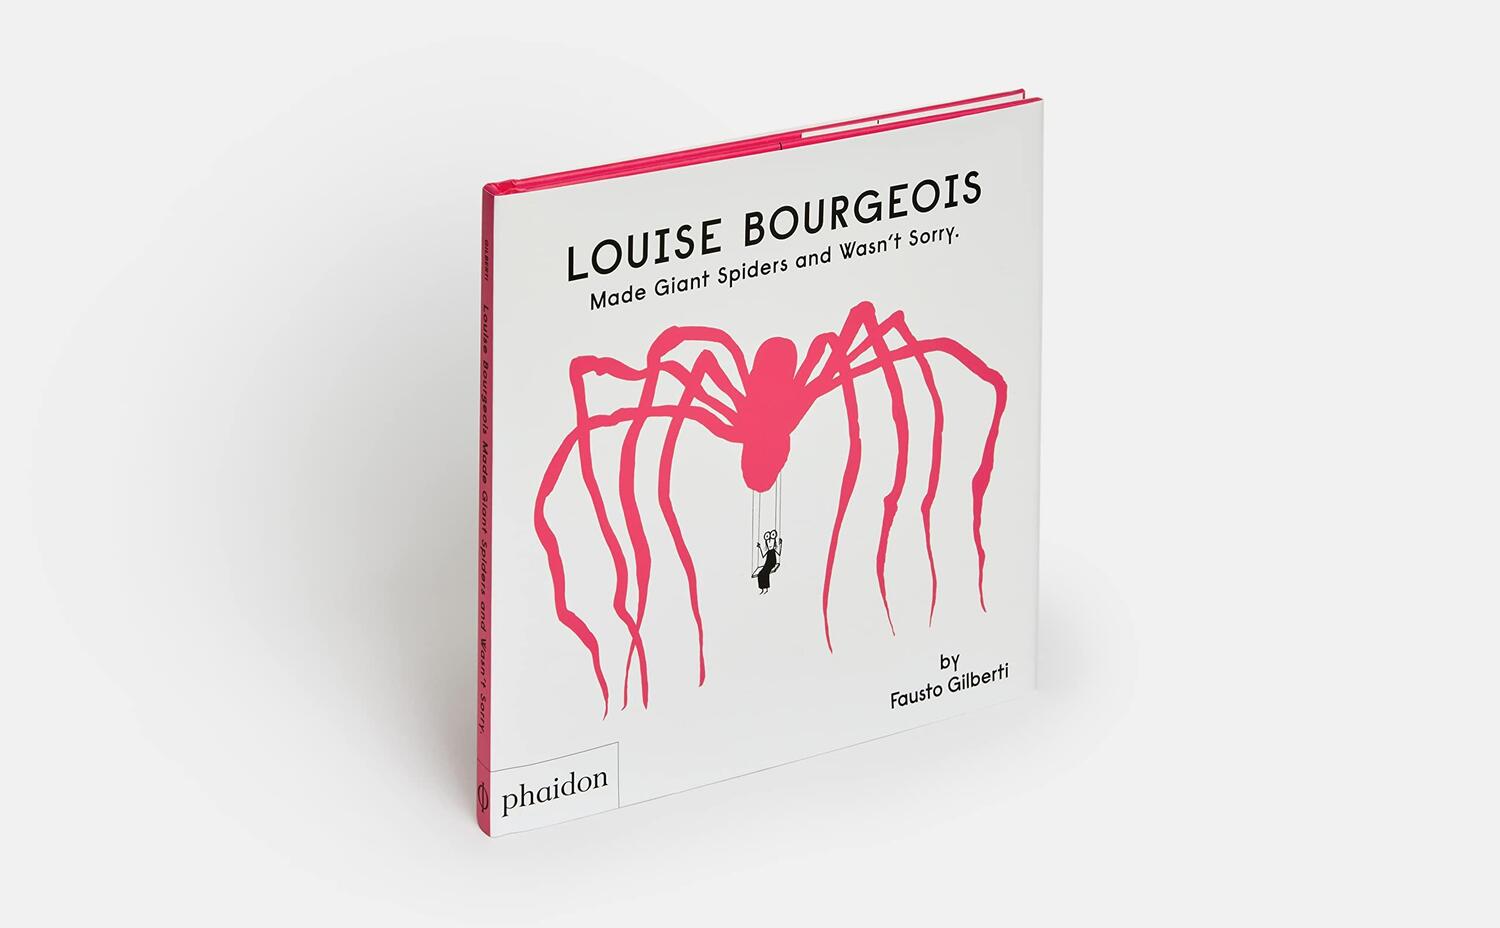 Bild: 9781838666248 | Louise Bourgeois Made Giant Spiders and Wasn't Sorry | Fausto Gilberti